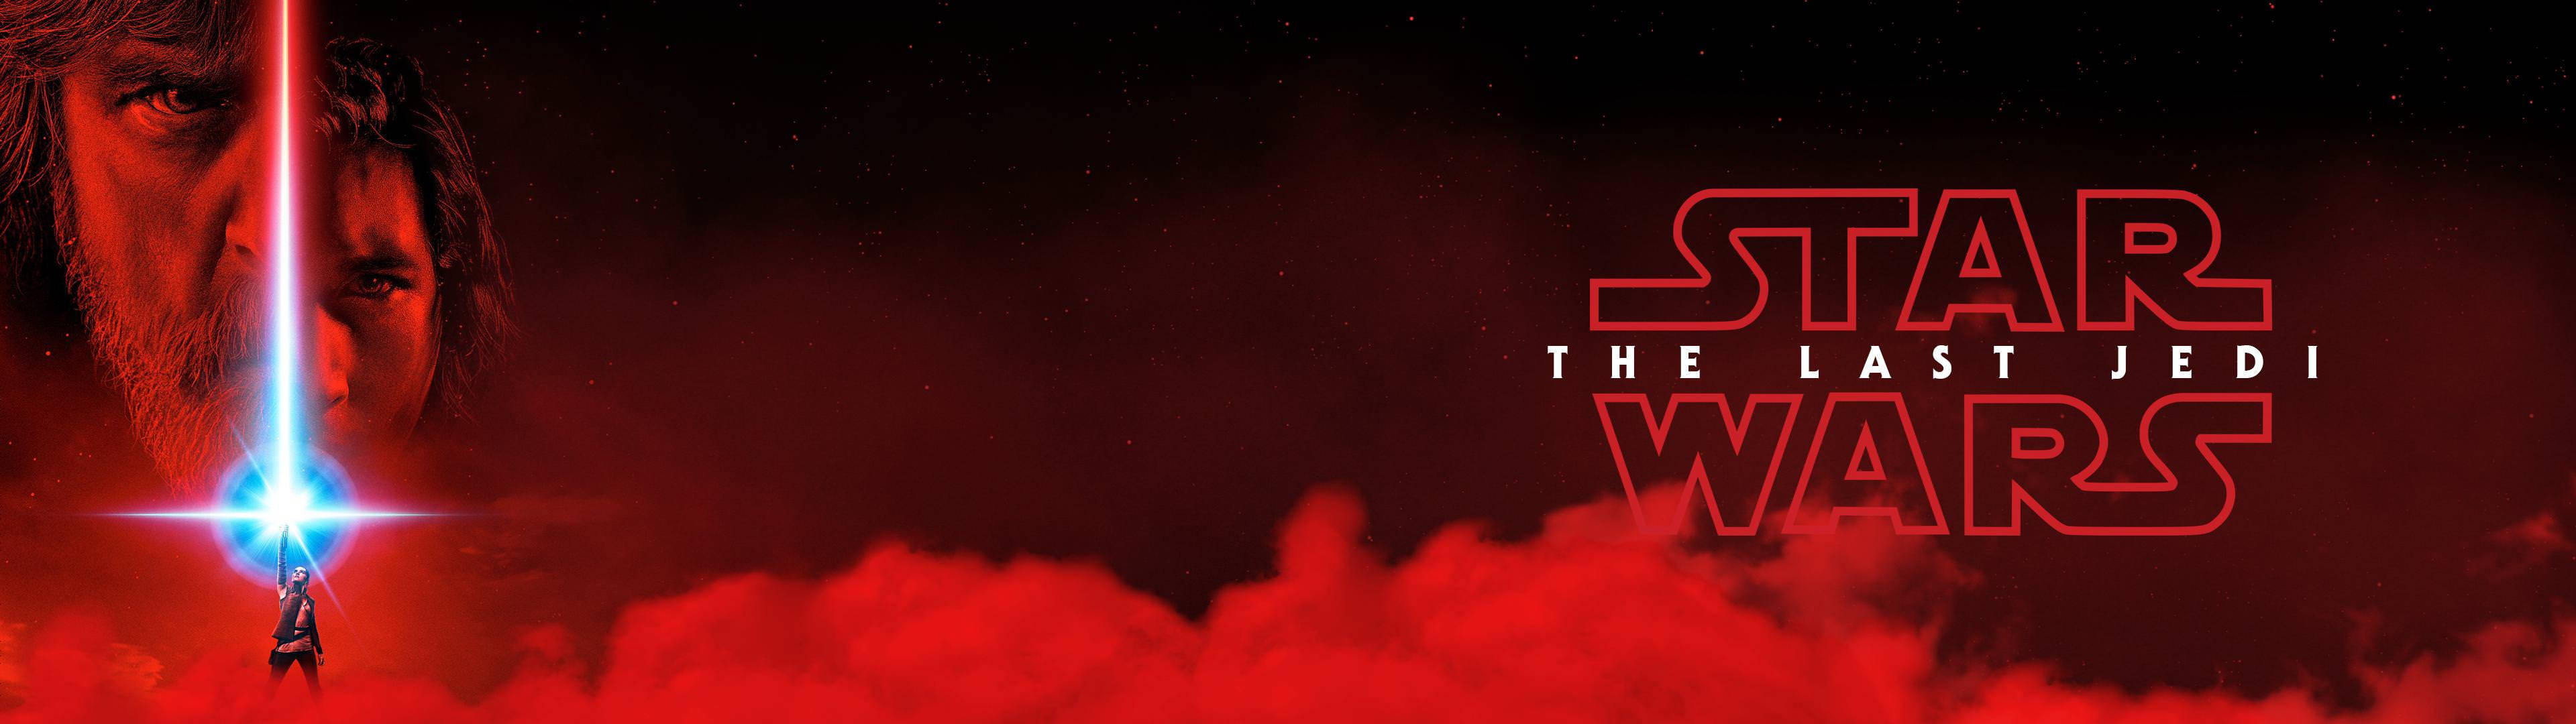 Star Wars Dual Screen The Last Jedi Red Background